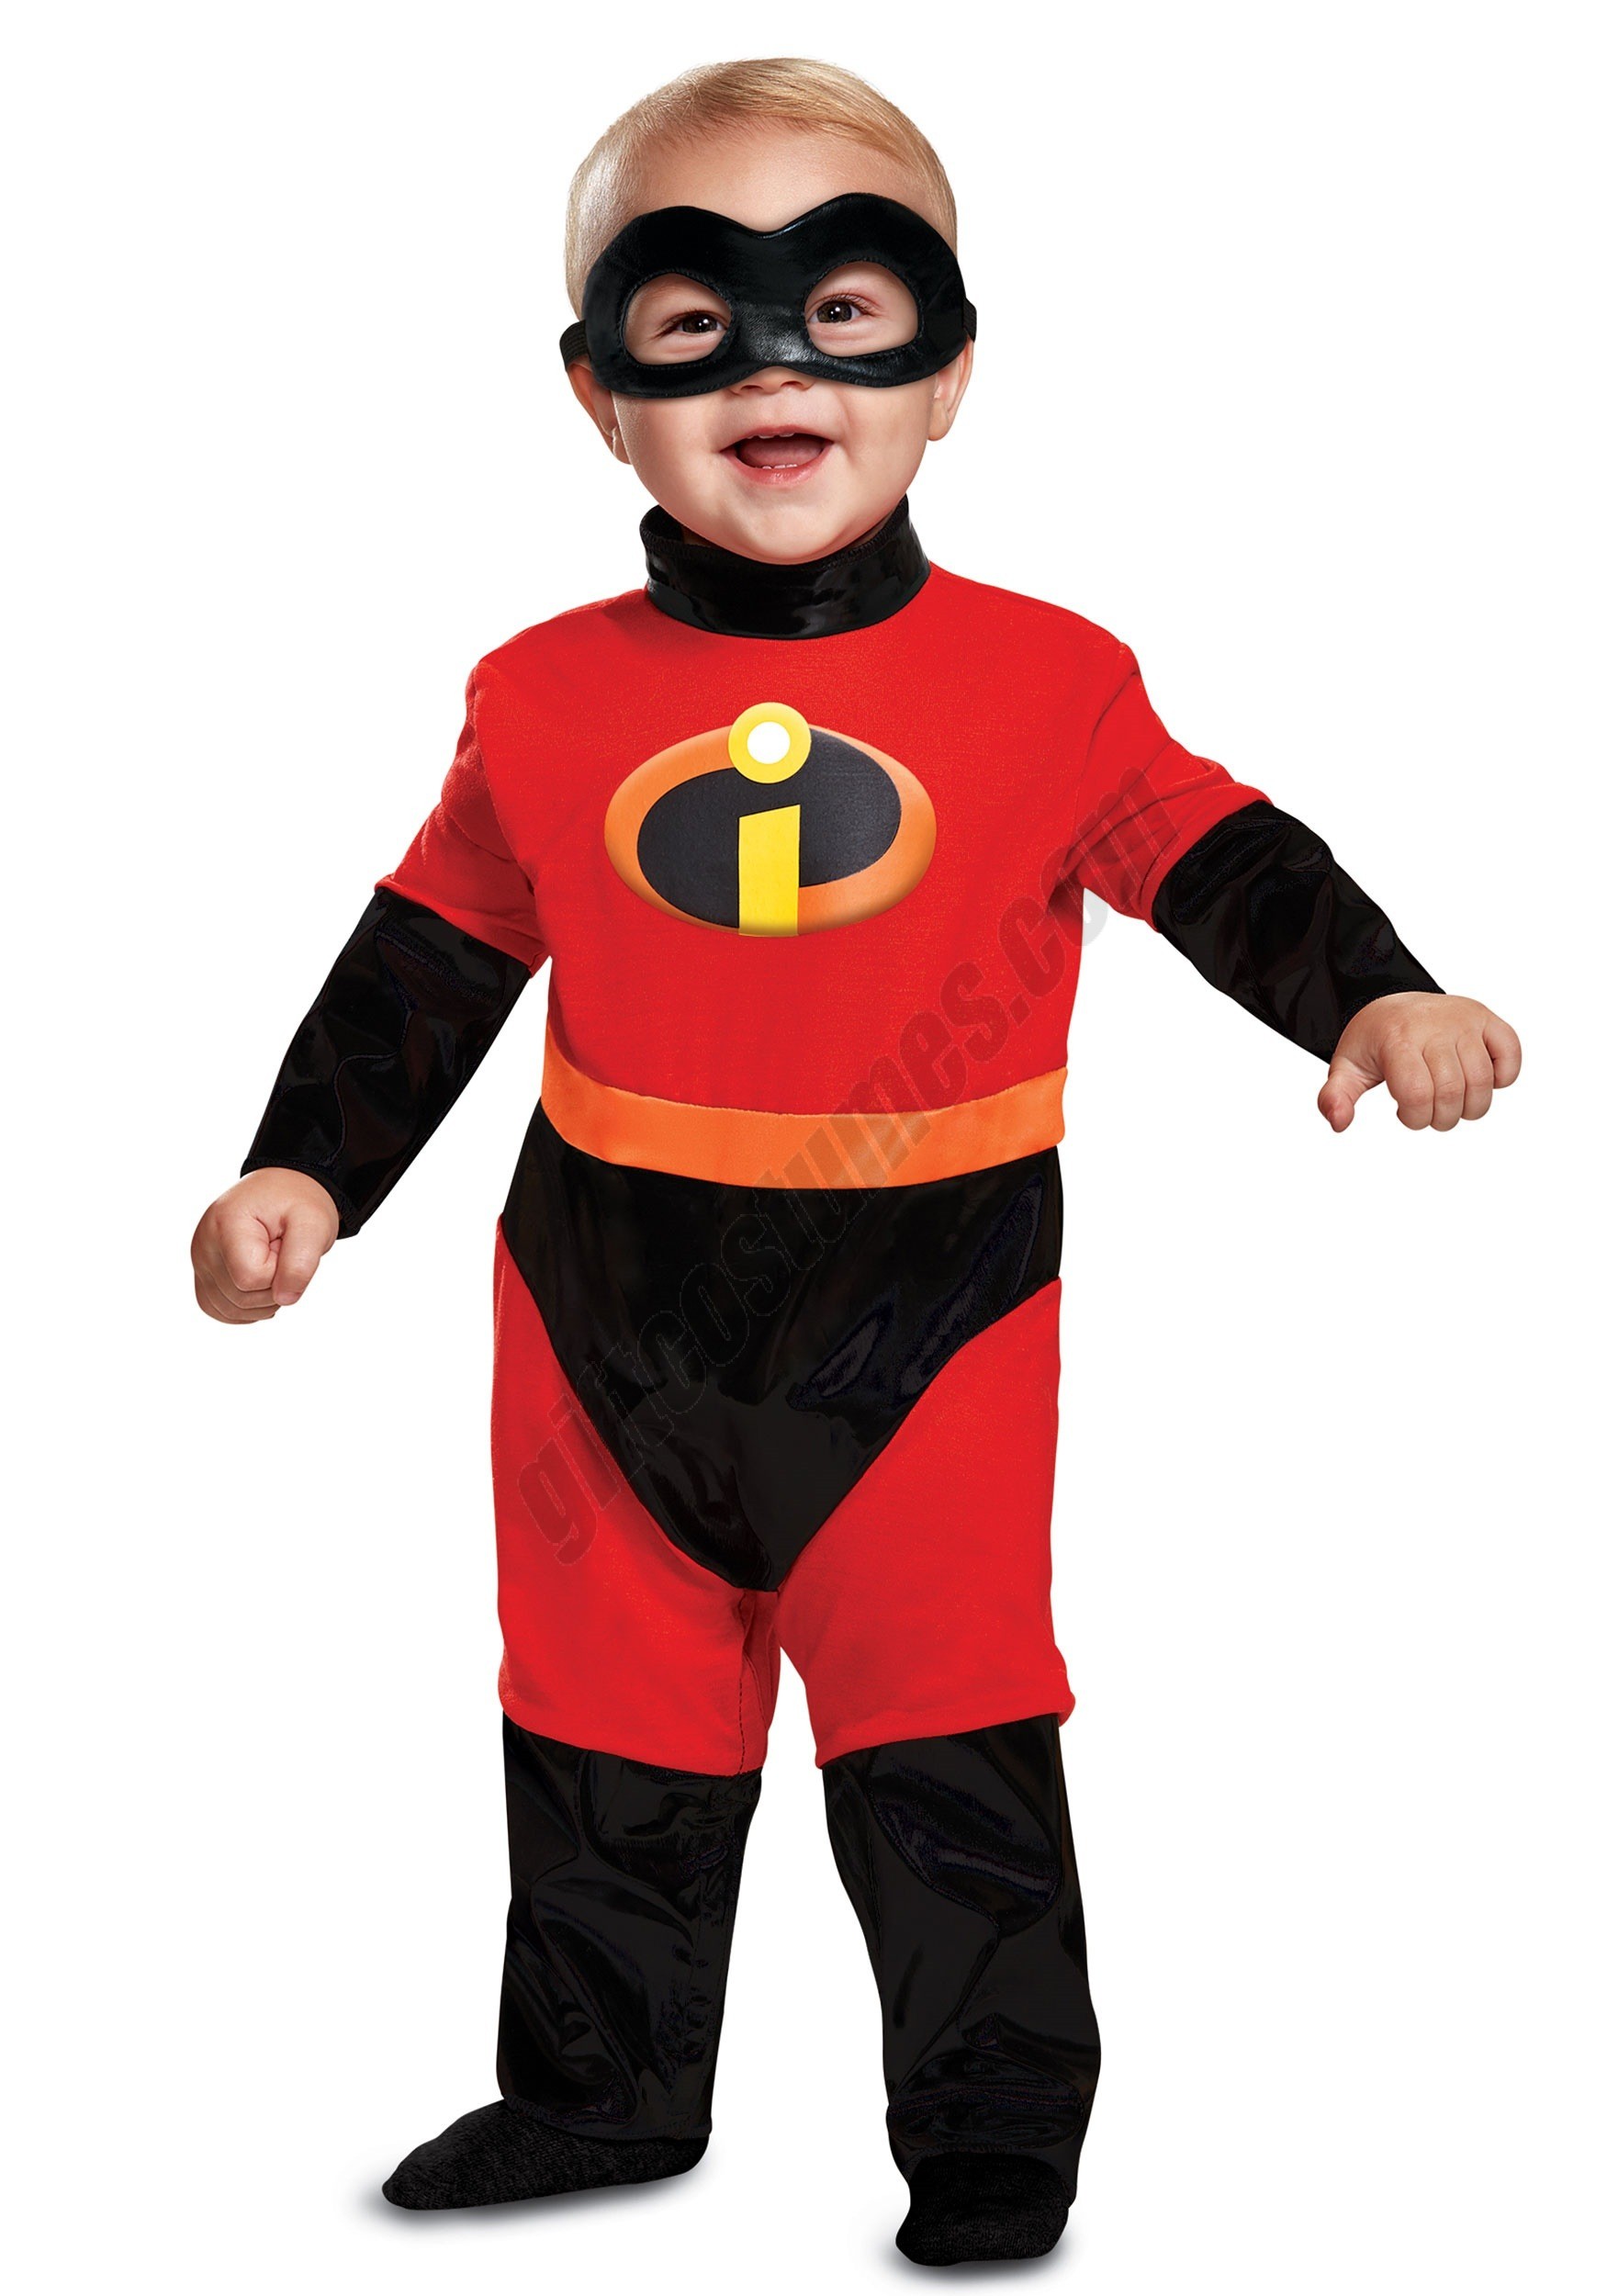 Disney Incredibles 2 Classic Baby Costume Promotions - Disney Incredibles 2 Classic Baby Costume Promotions